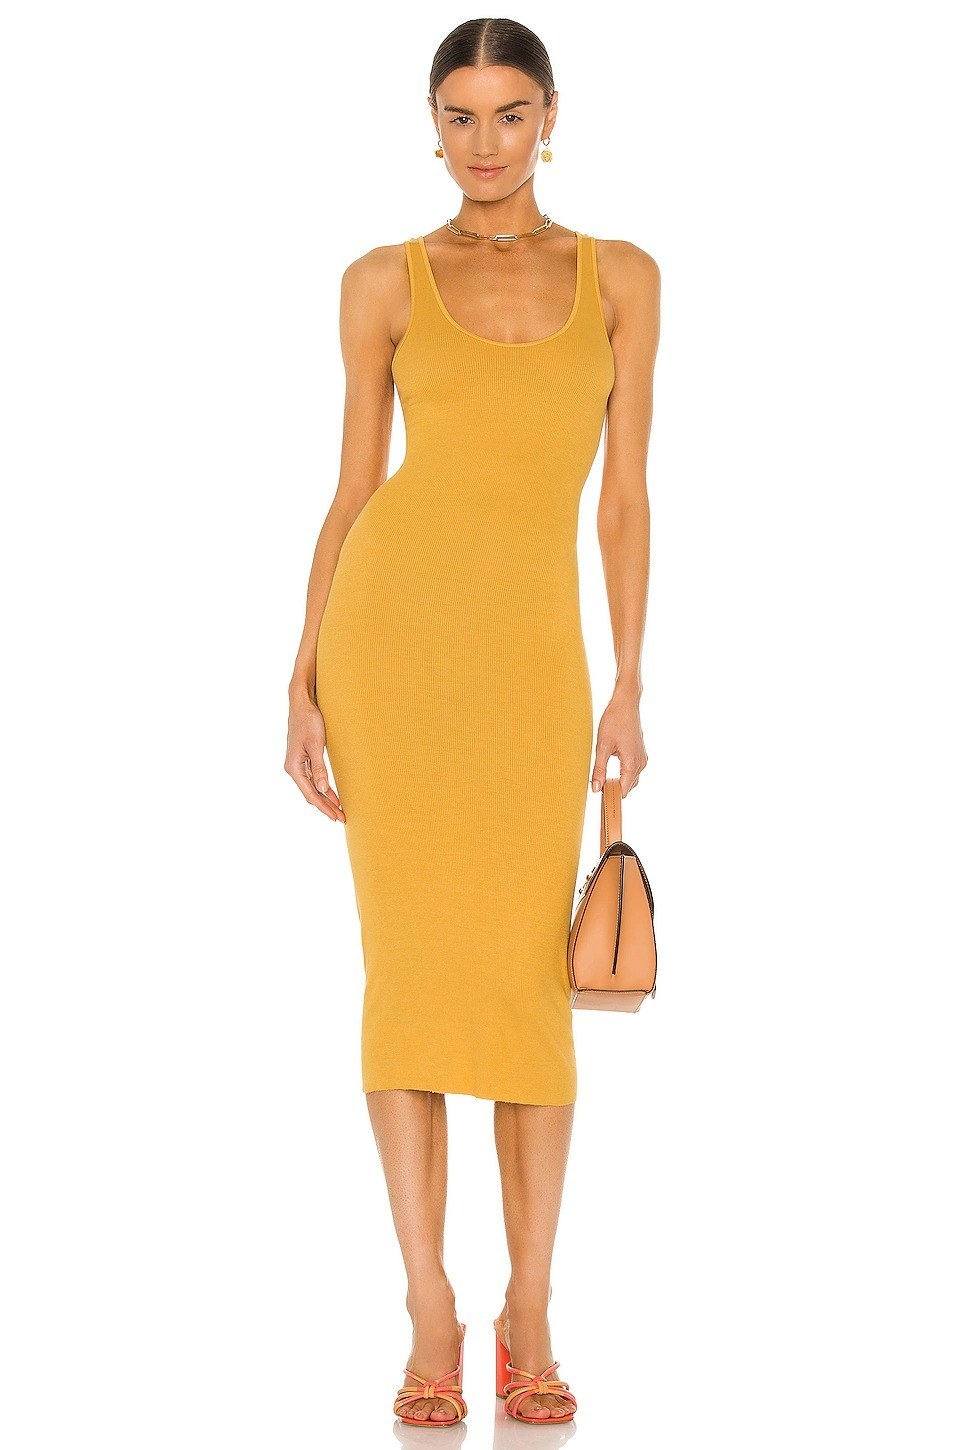 Model wearing yellow tank dress that stops past the knee